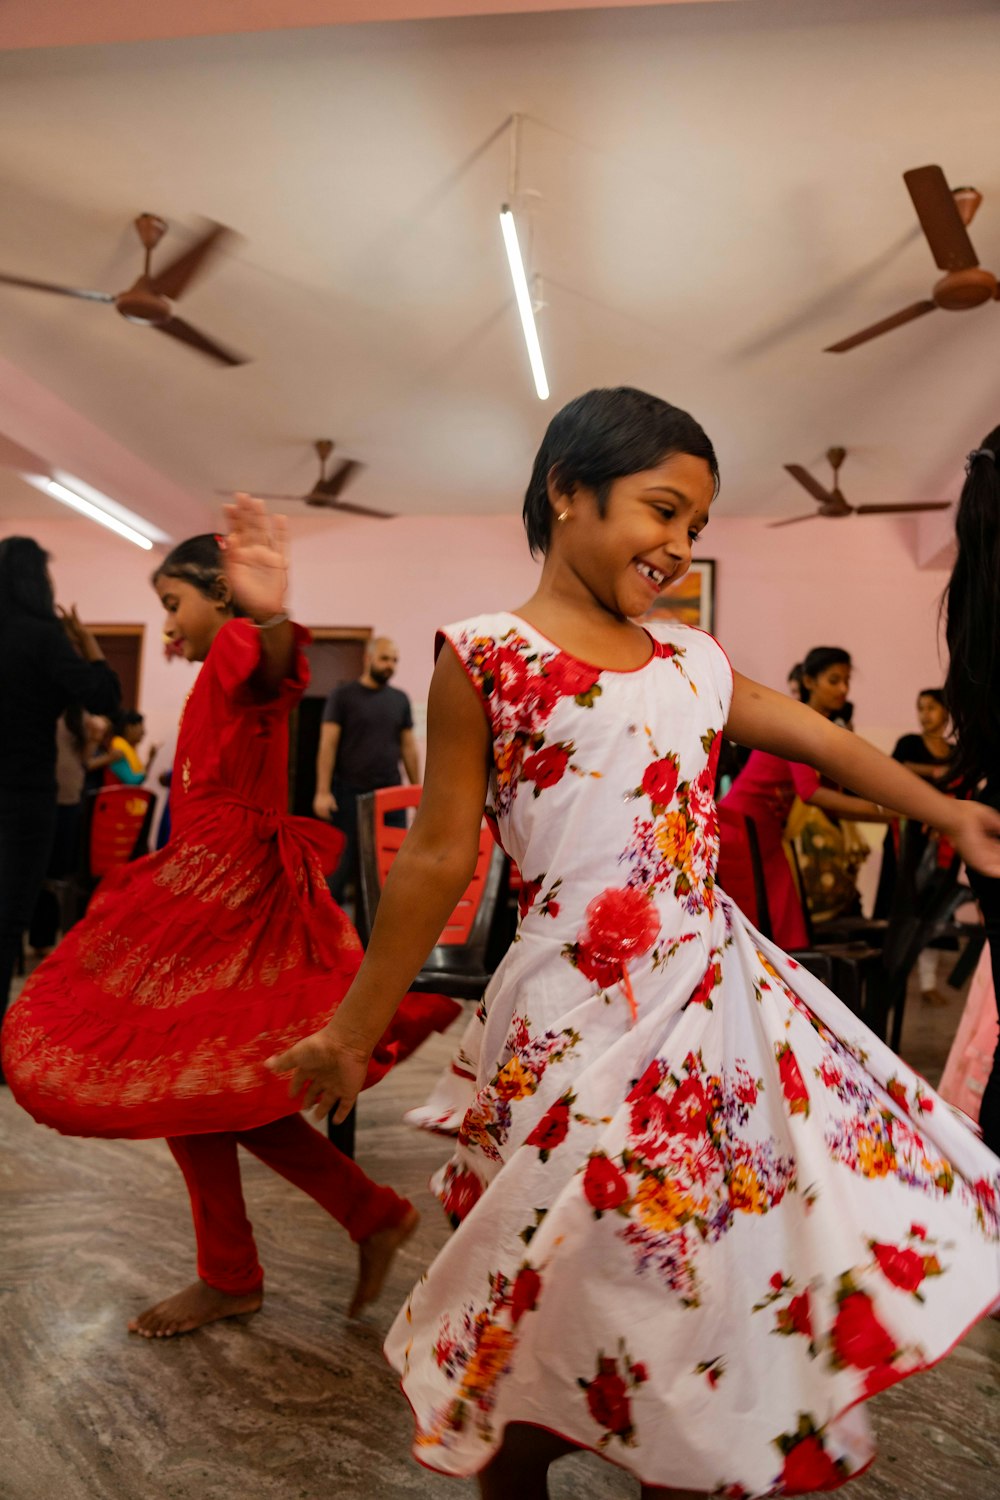 a young girl in a red and white dress dancing